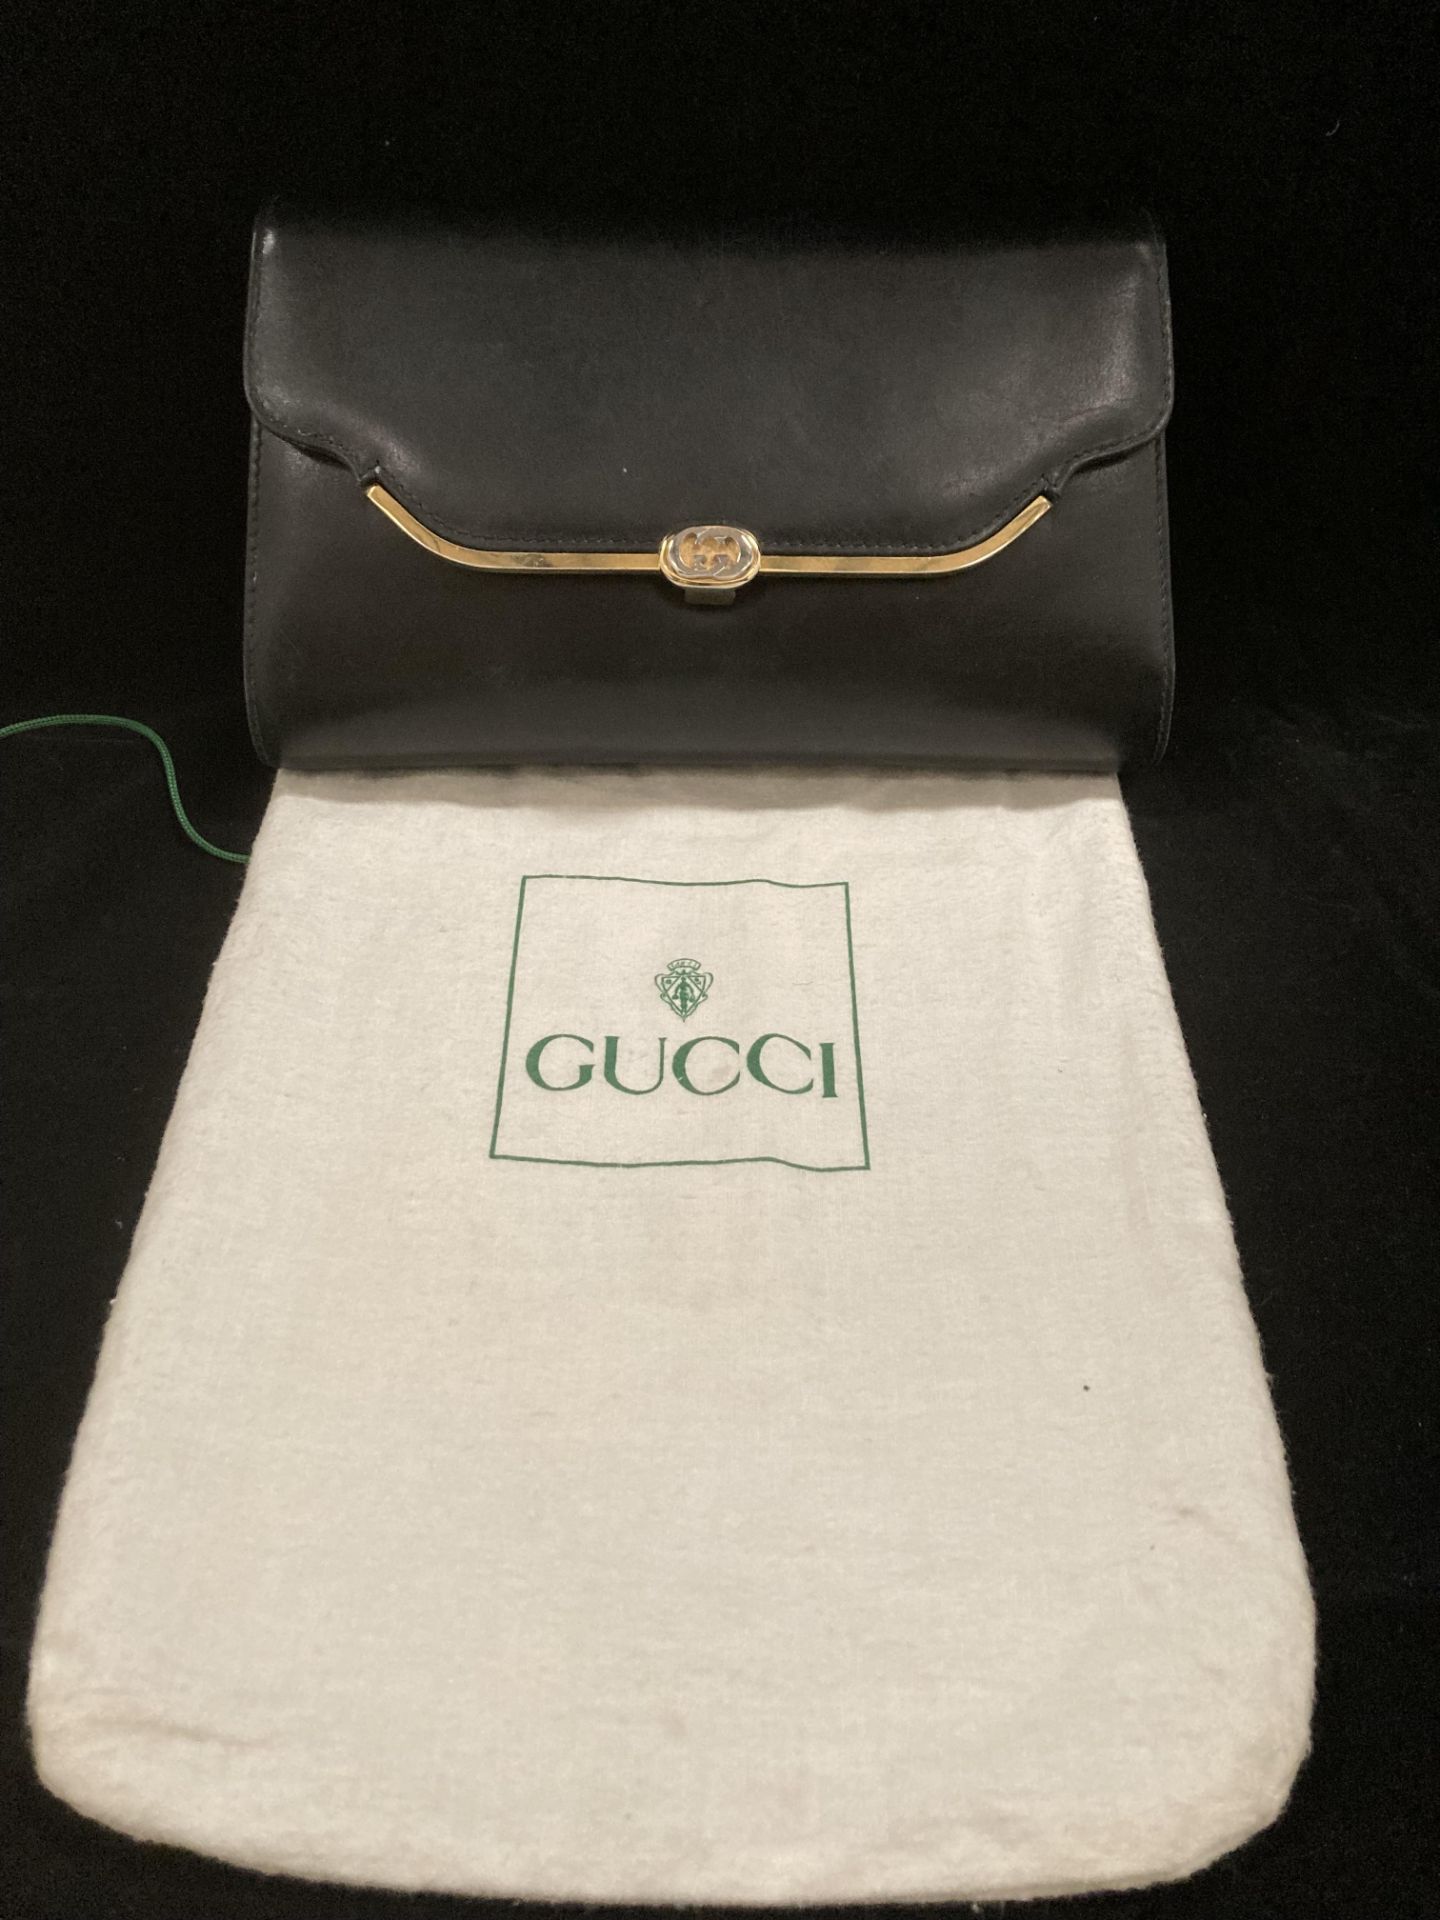 A Gucci black leather clutch bag including a long strap and protective bag.